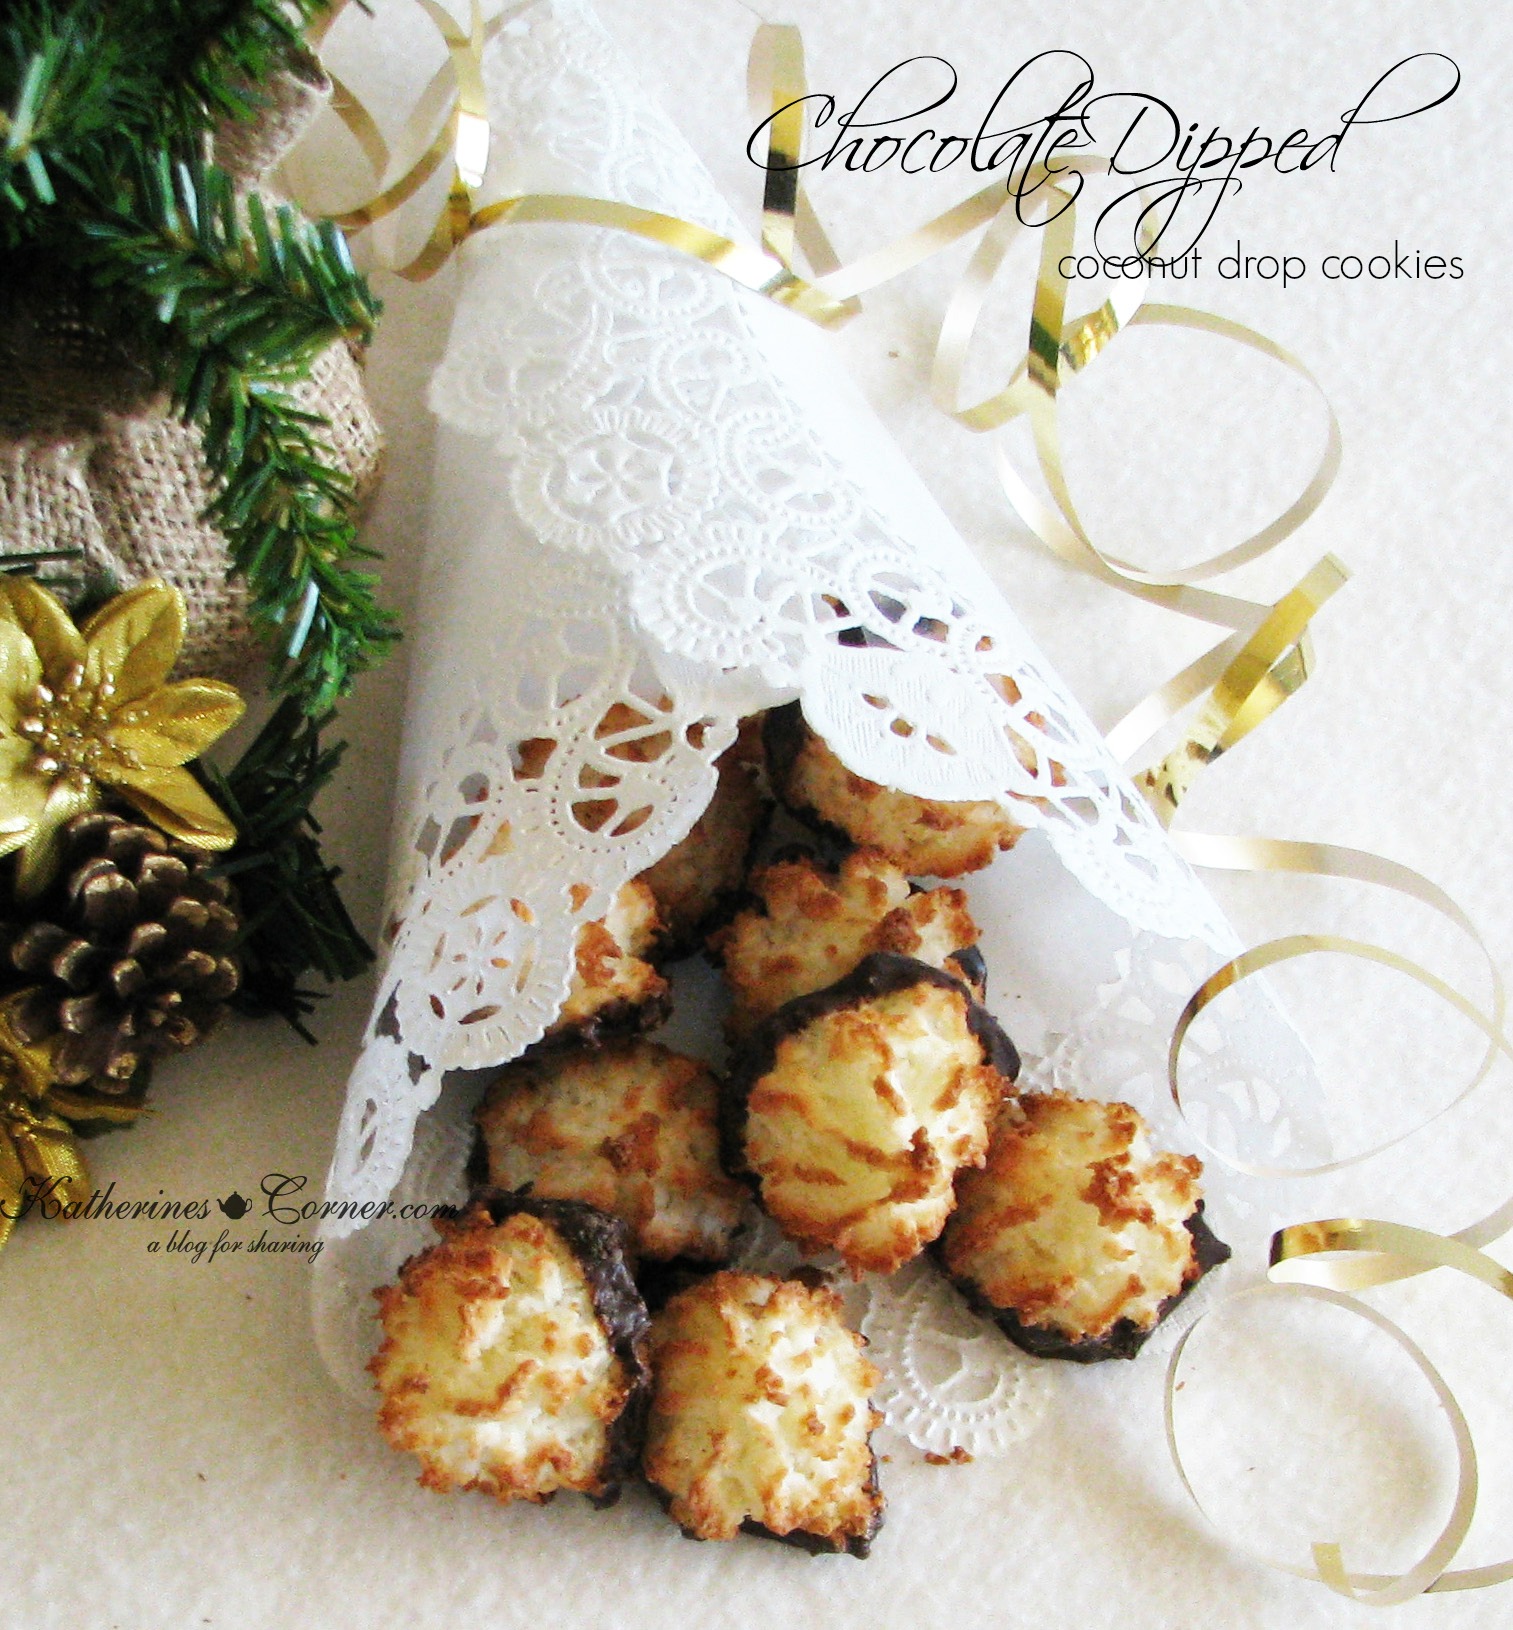 Chocolate Dipped Coconut Drop Cookies